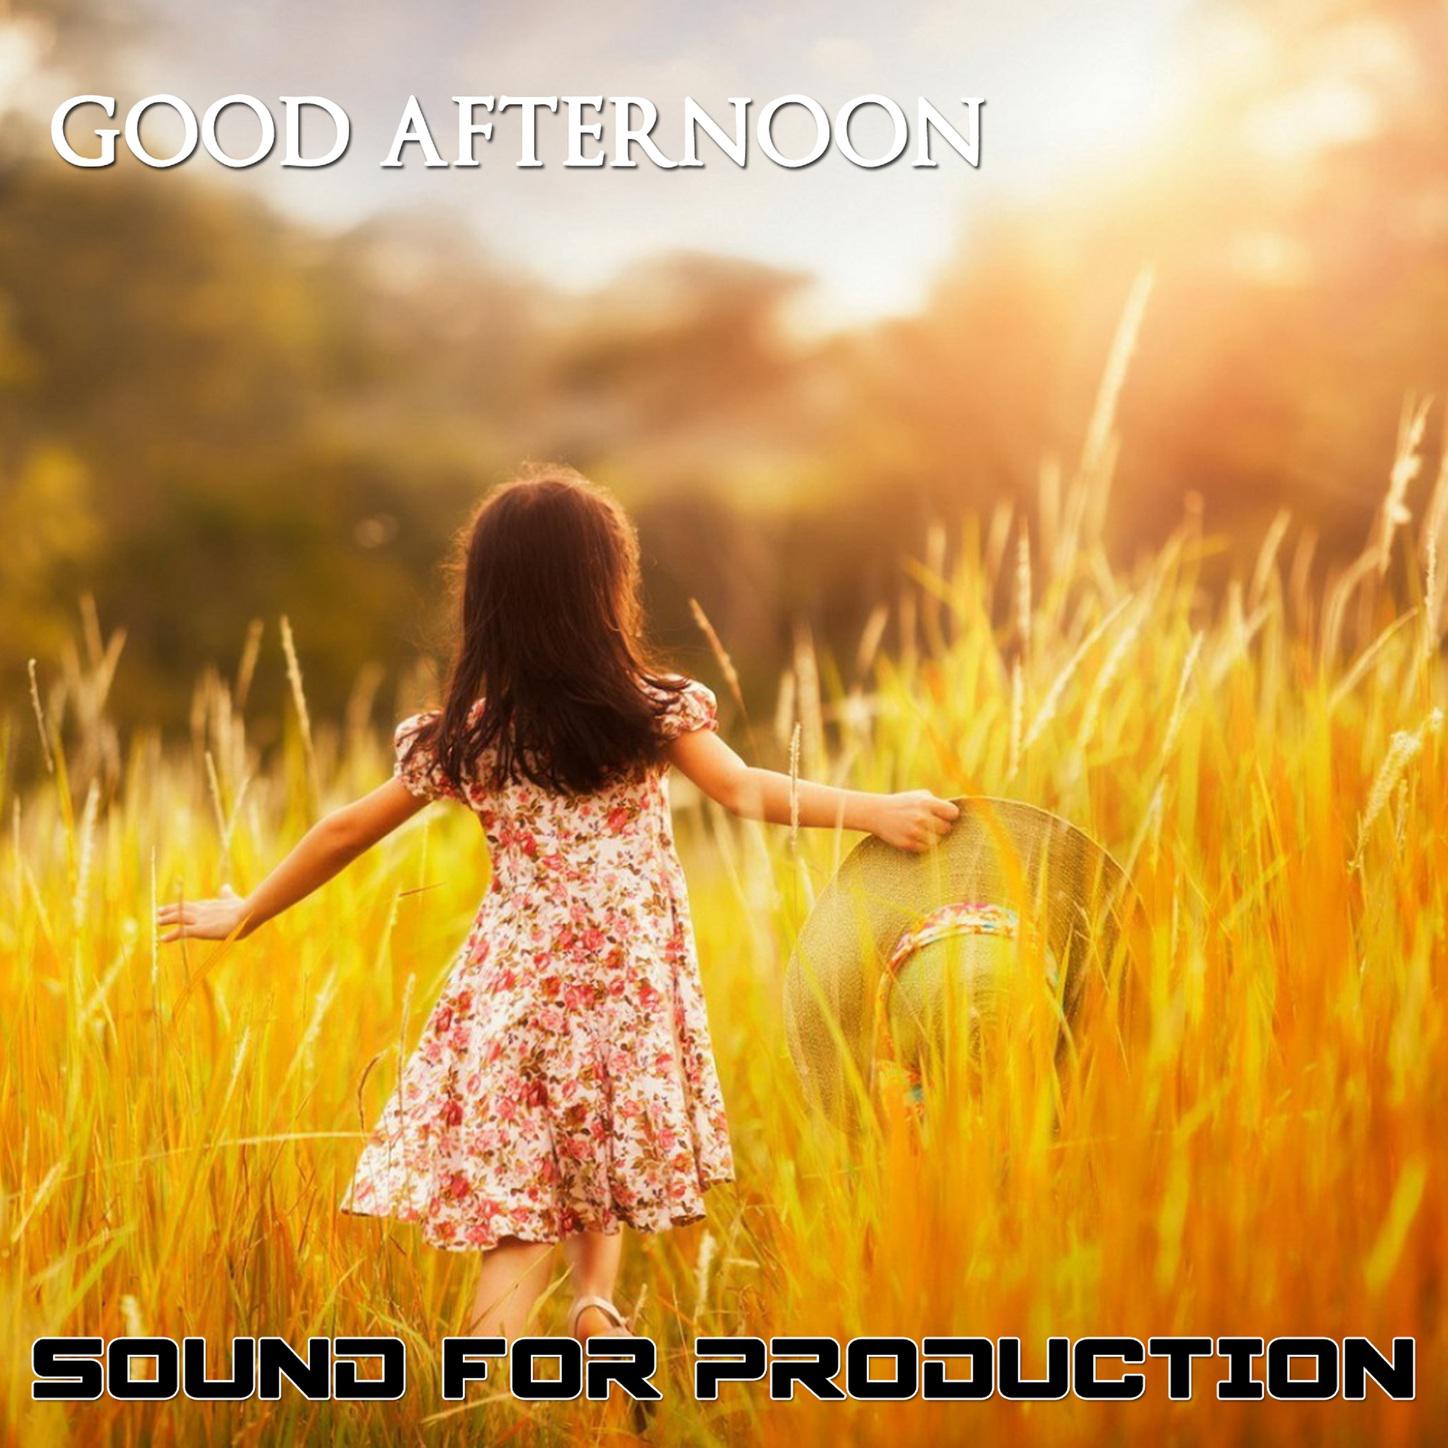 Sound For Production Good Afternoon